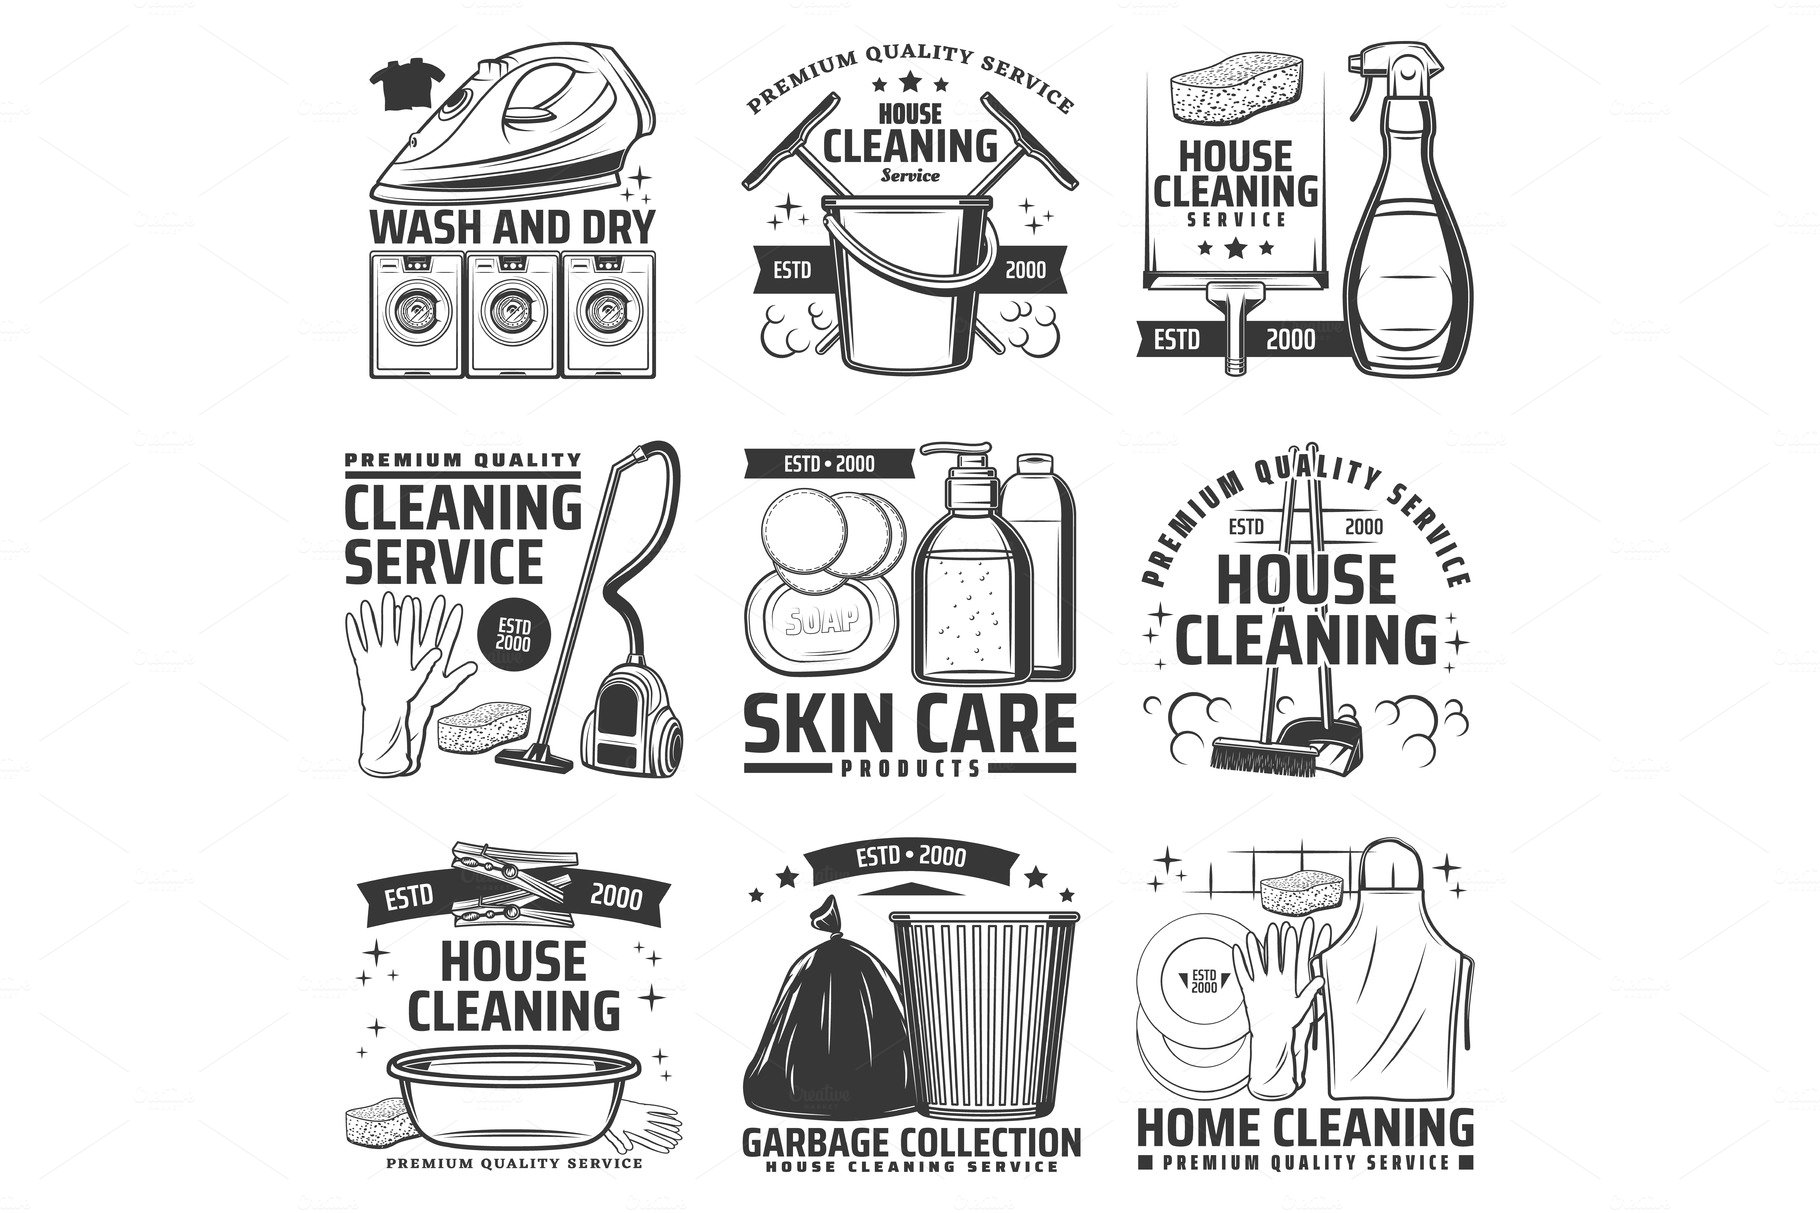 Laundry and house cleaning cover image.